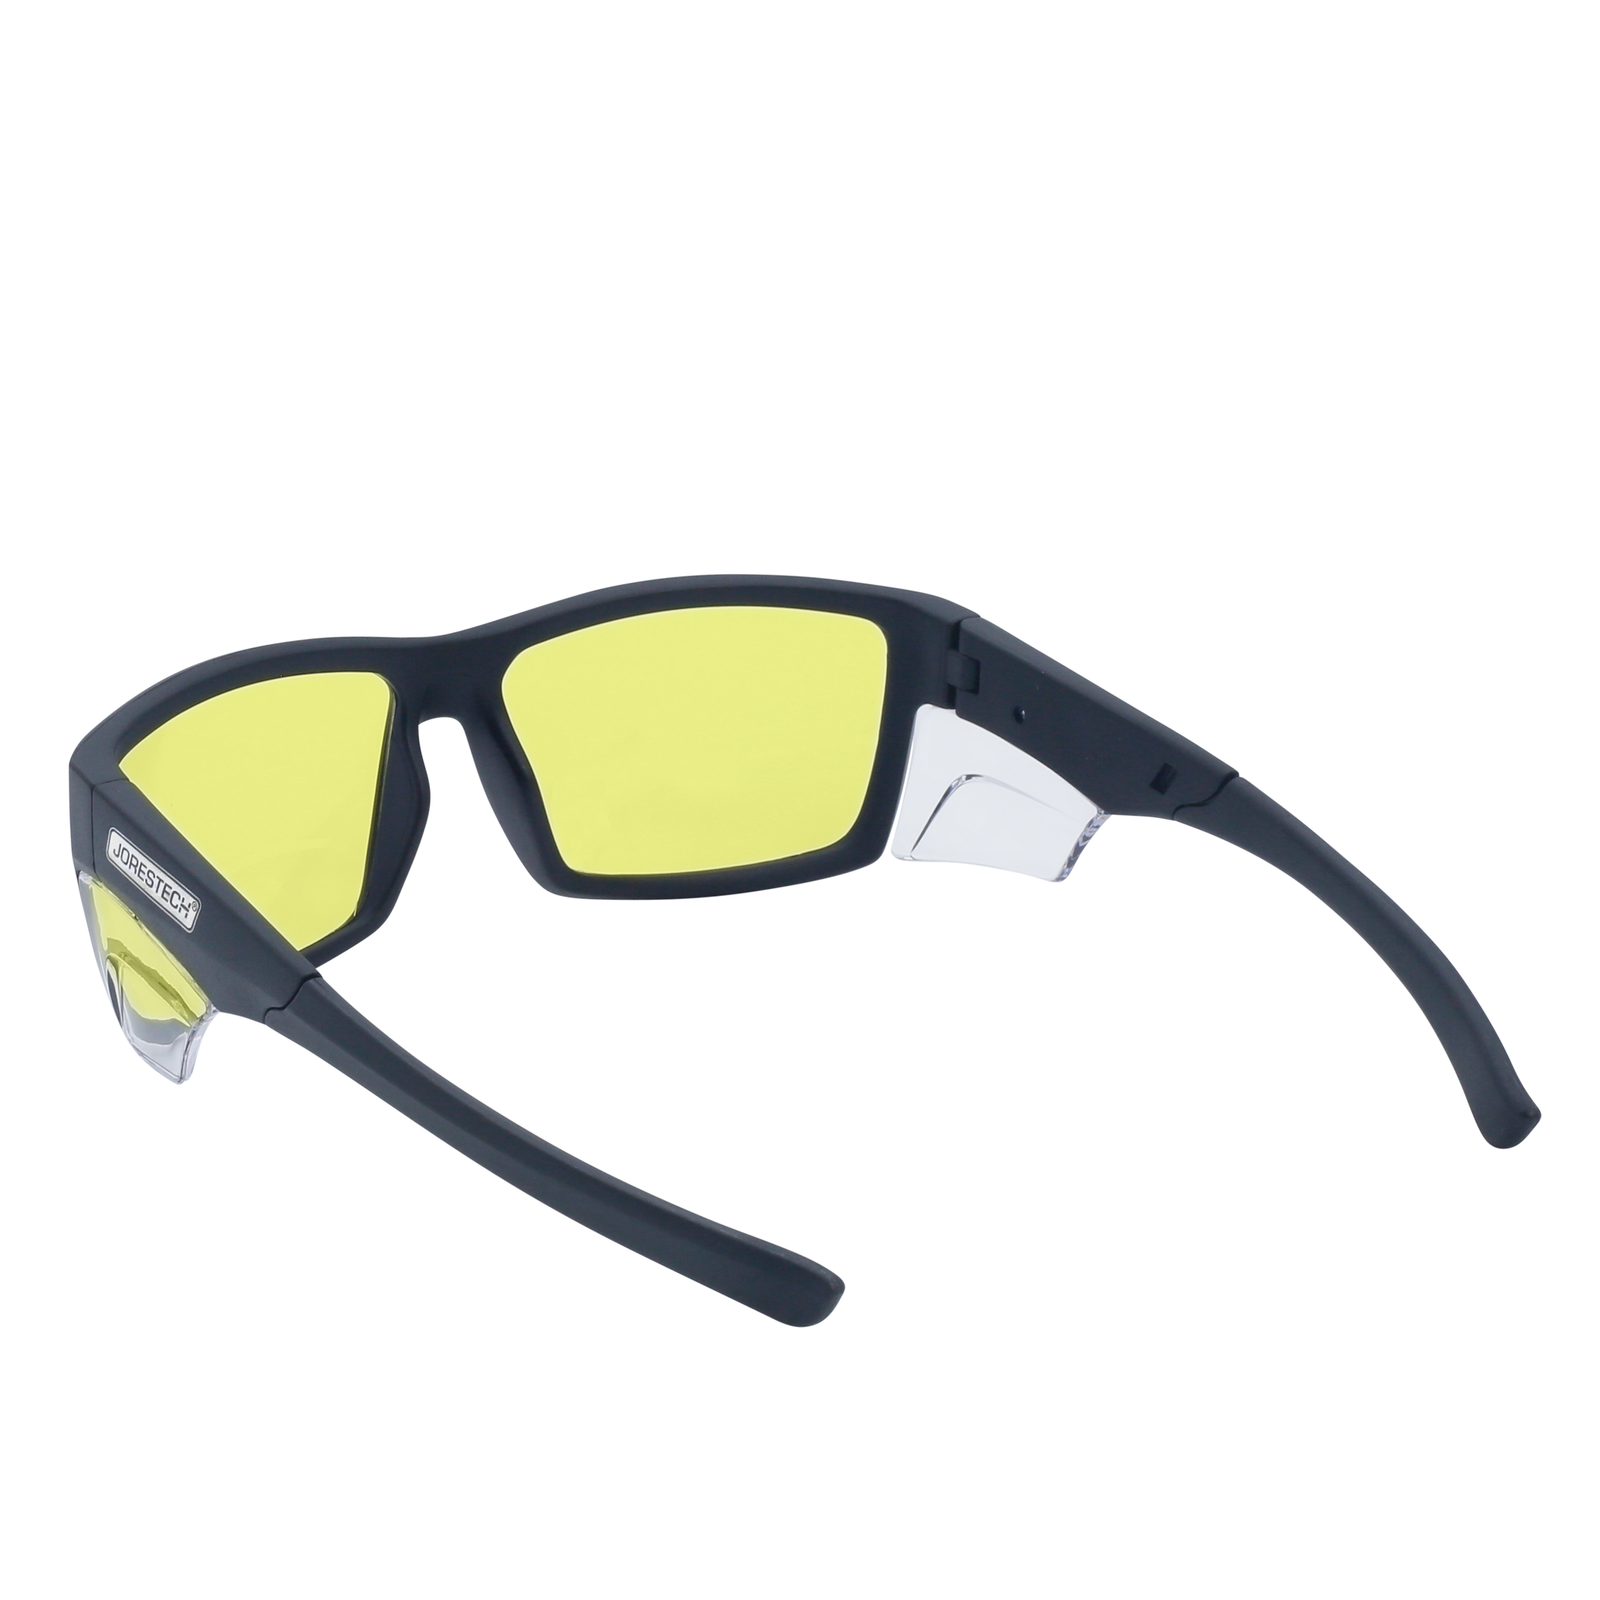 Image shows a back view of the yellow JORESTECH safety Glass with clear side shield for high impact protection. These safety glasses with clear side shields  are ANSI and have black frame and yellow polycarbonate lenses. The background of the image is white